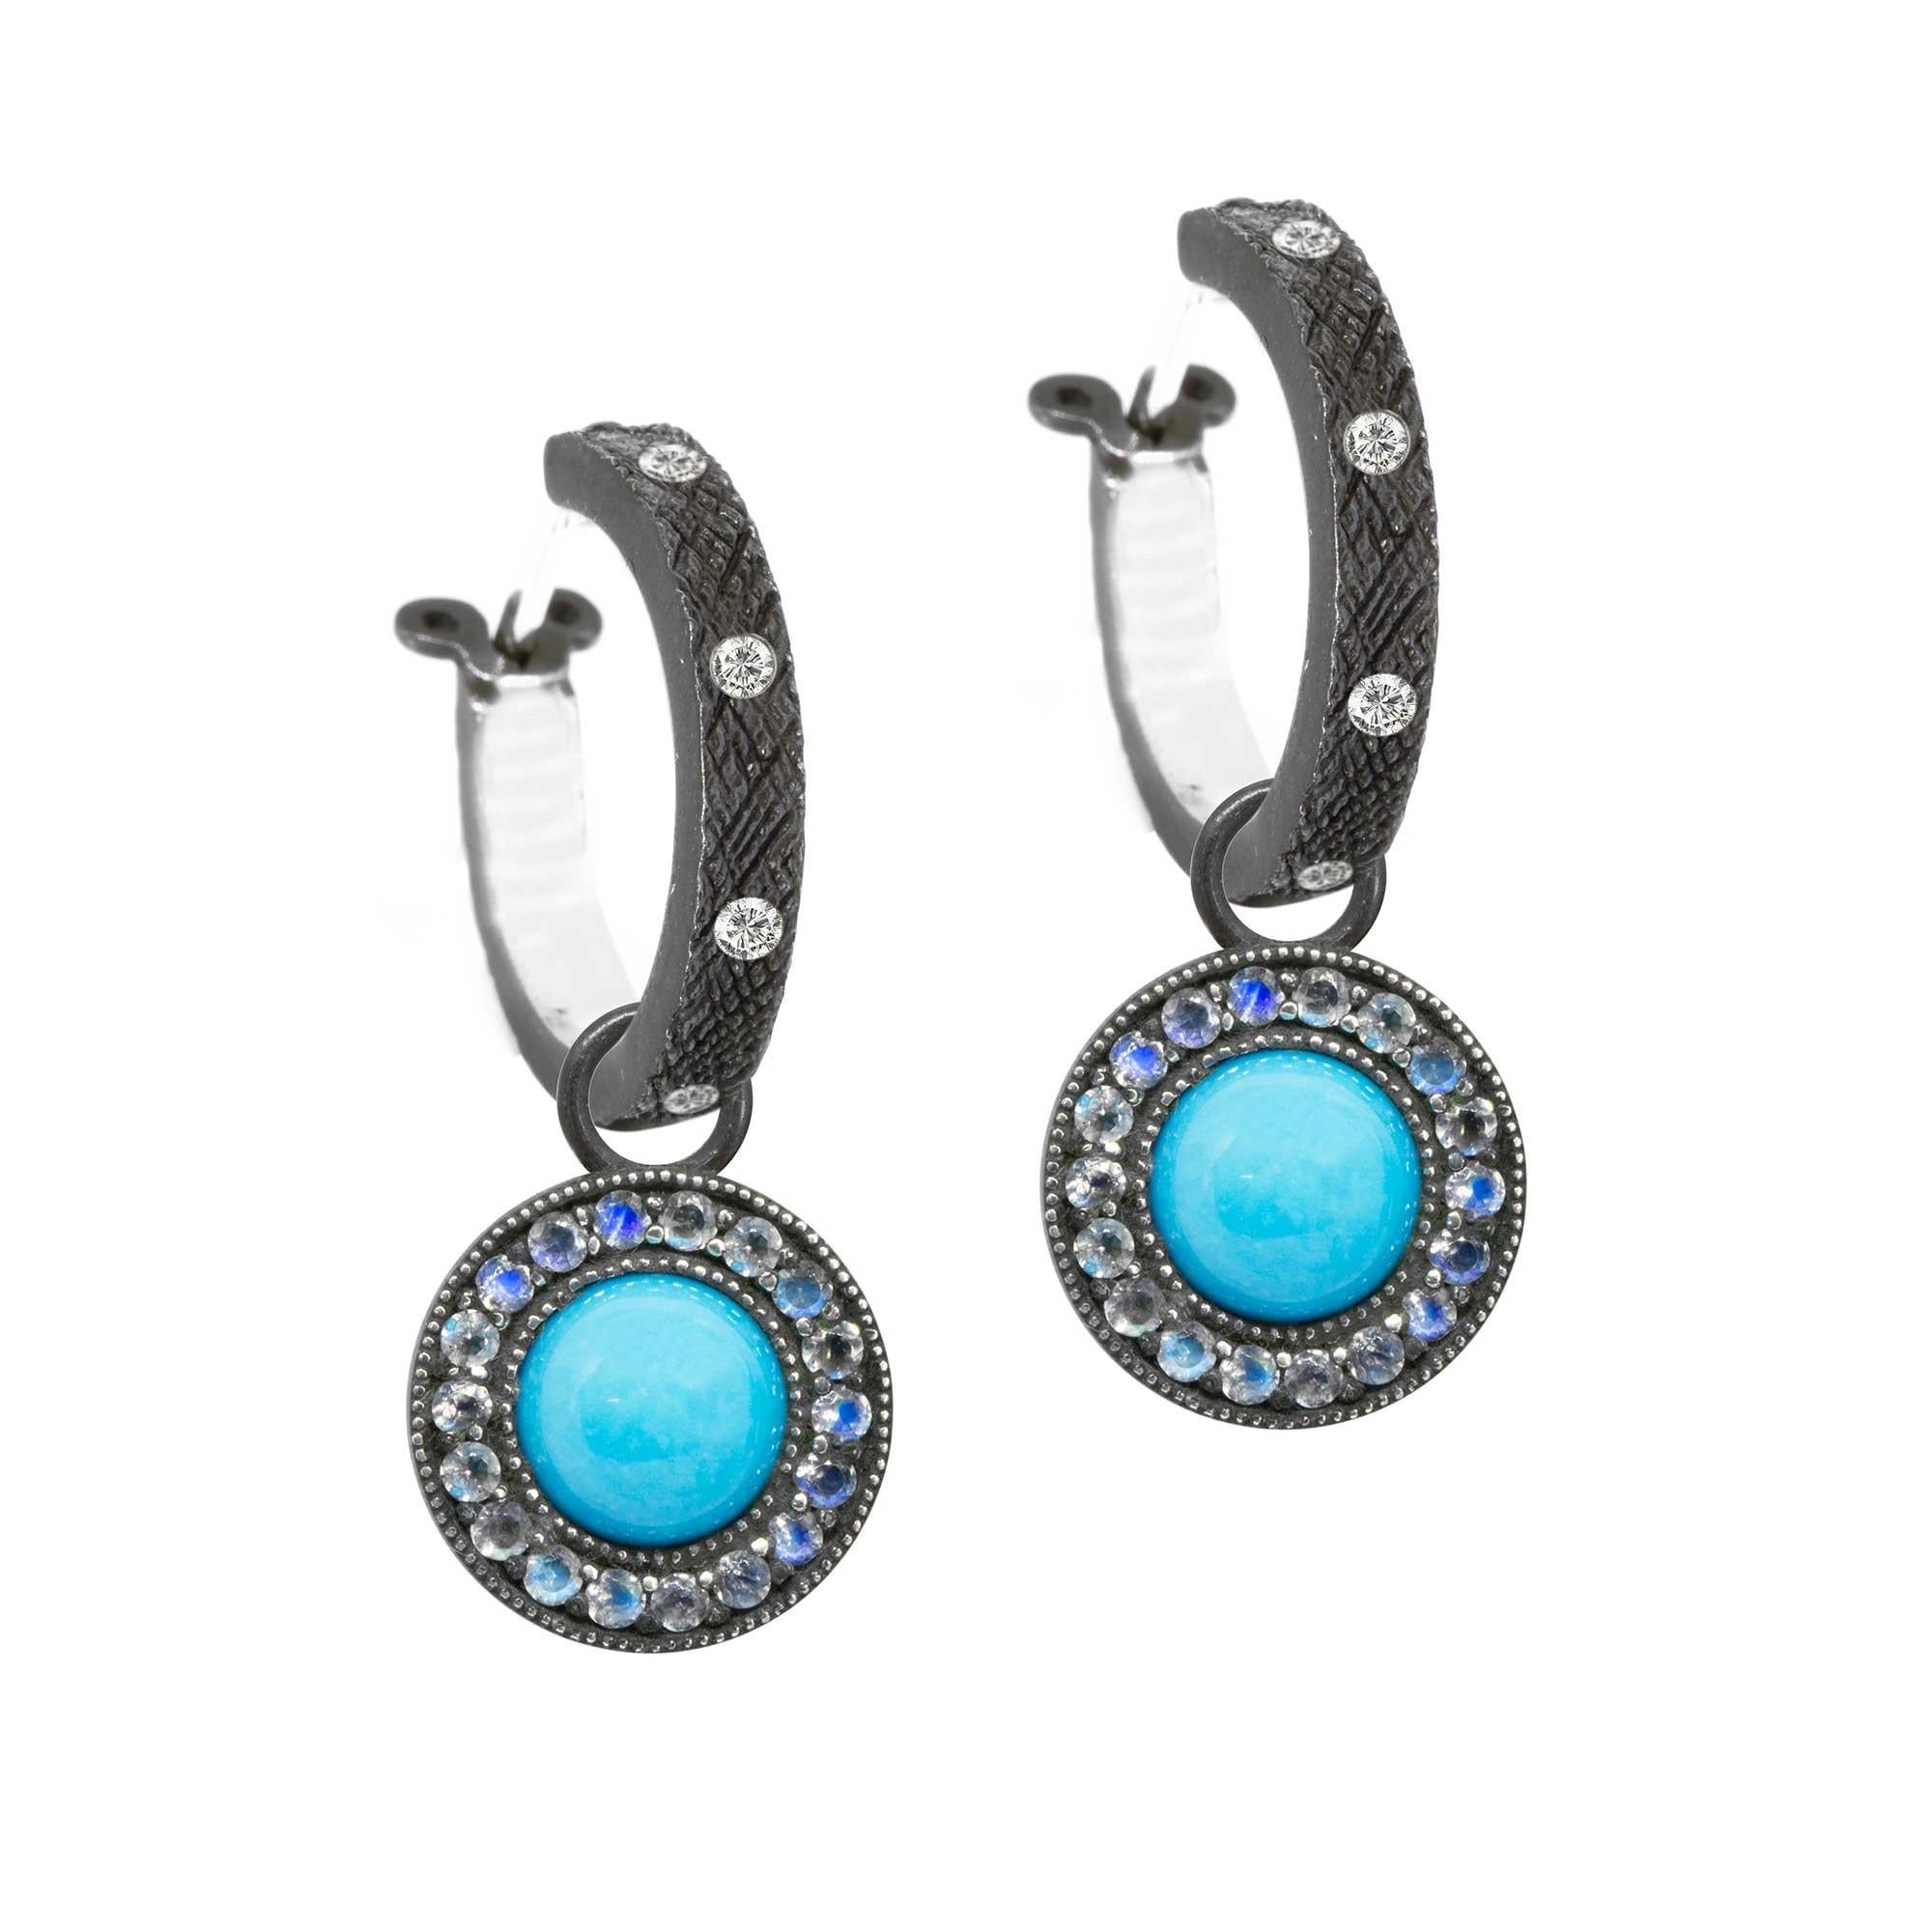 In the Moonstone Orbit Oxidized Charms, concentric circles of engraved blackened silver and luminous moonstones surround sleeping beauty turquoise cabochons for a cool mix of textures and lusters. They pair with any of our hoops and mix well with